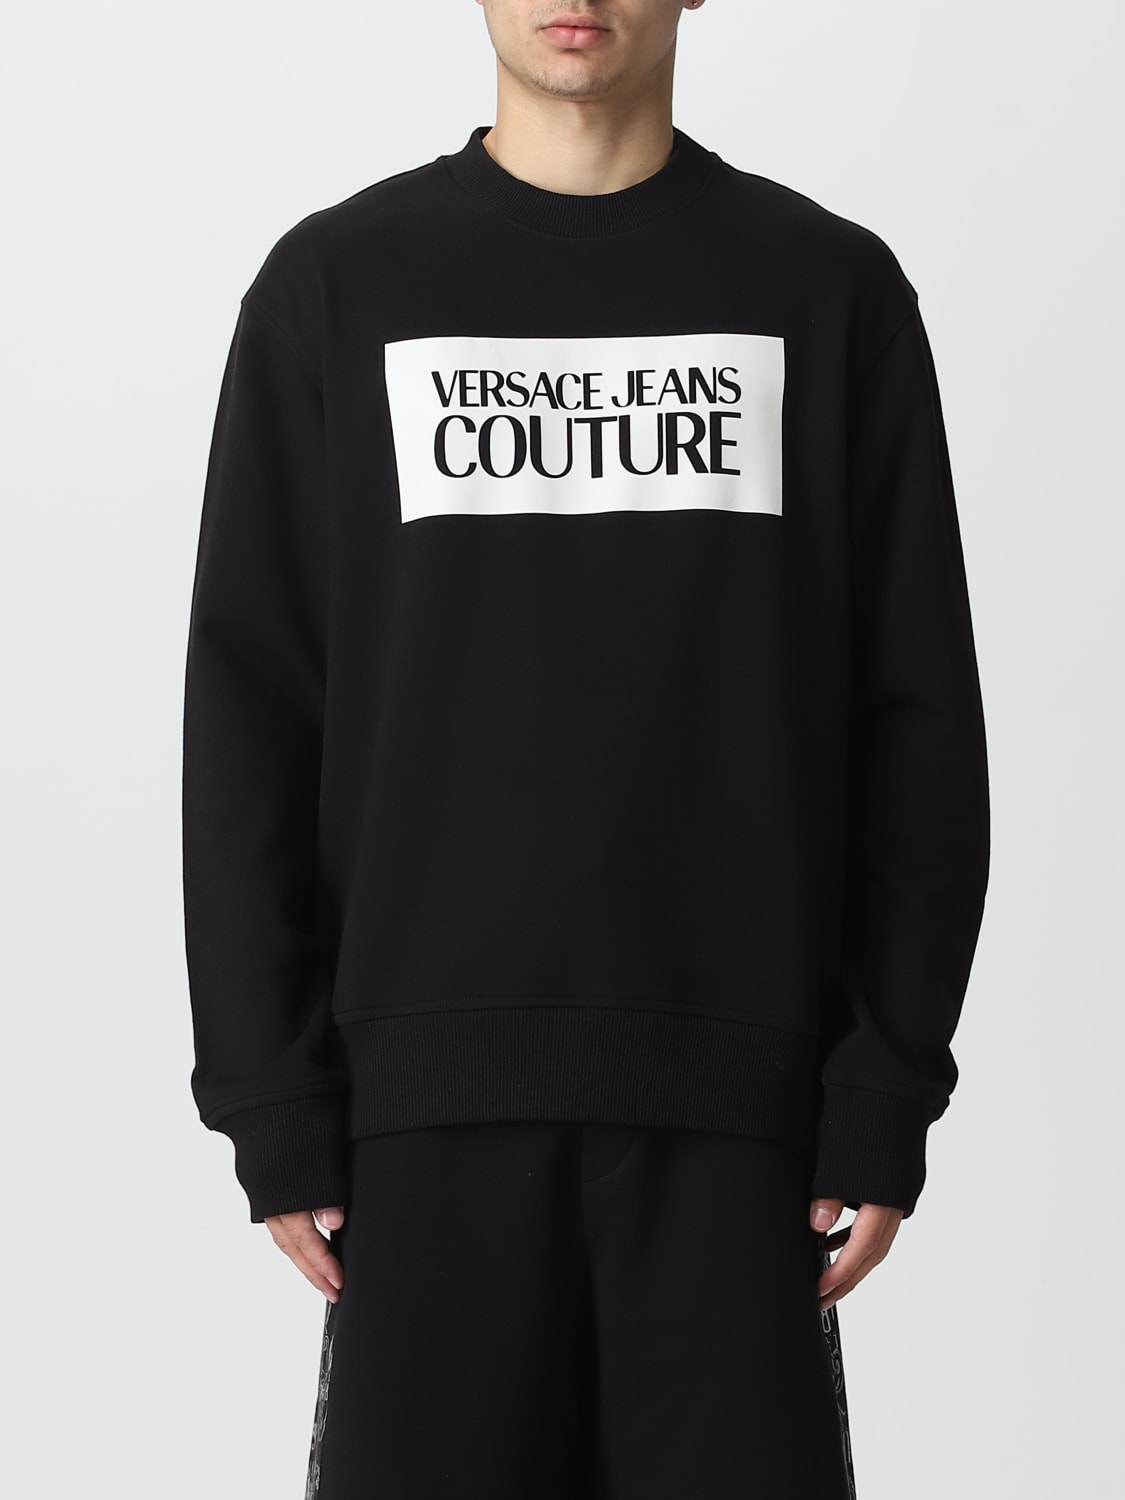 VERSACE JEANS COUTURE スウェット　ブラック